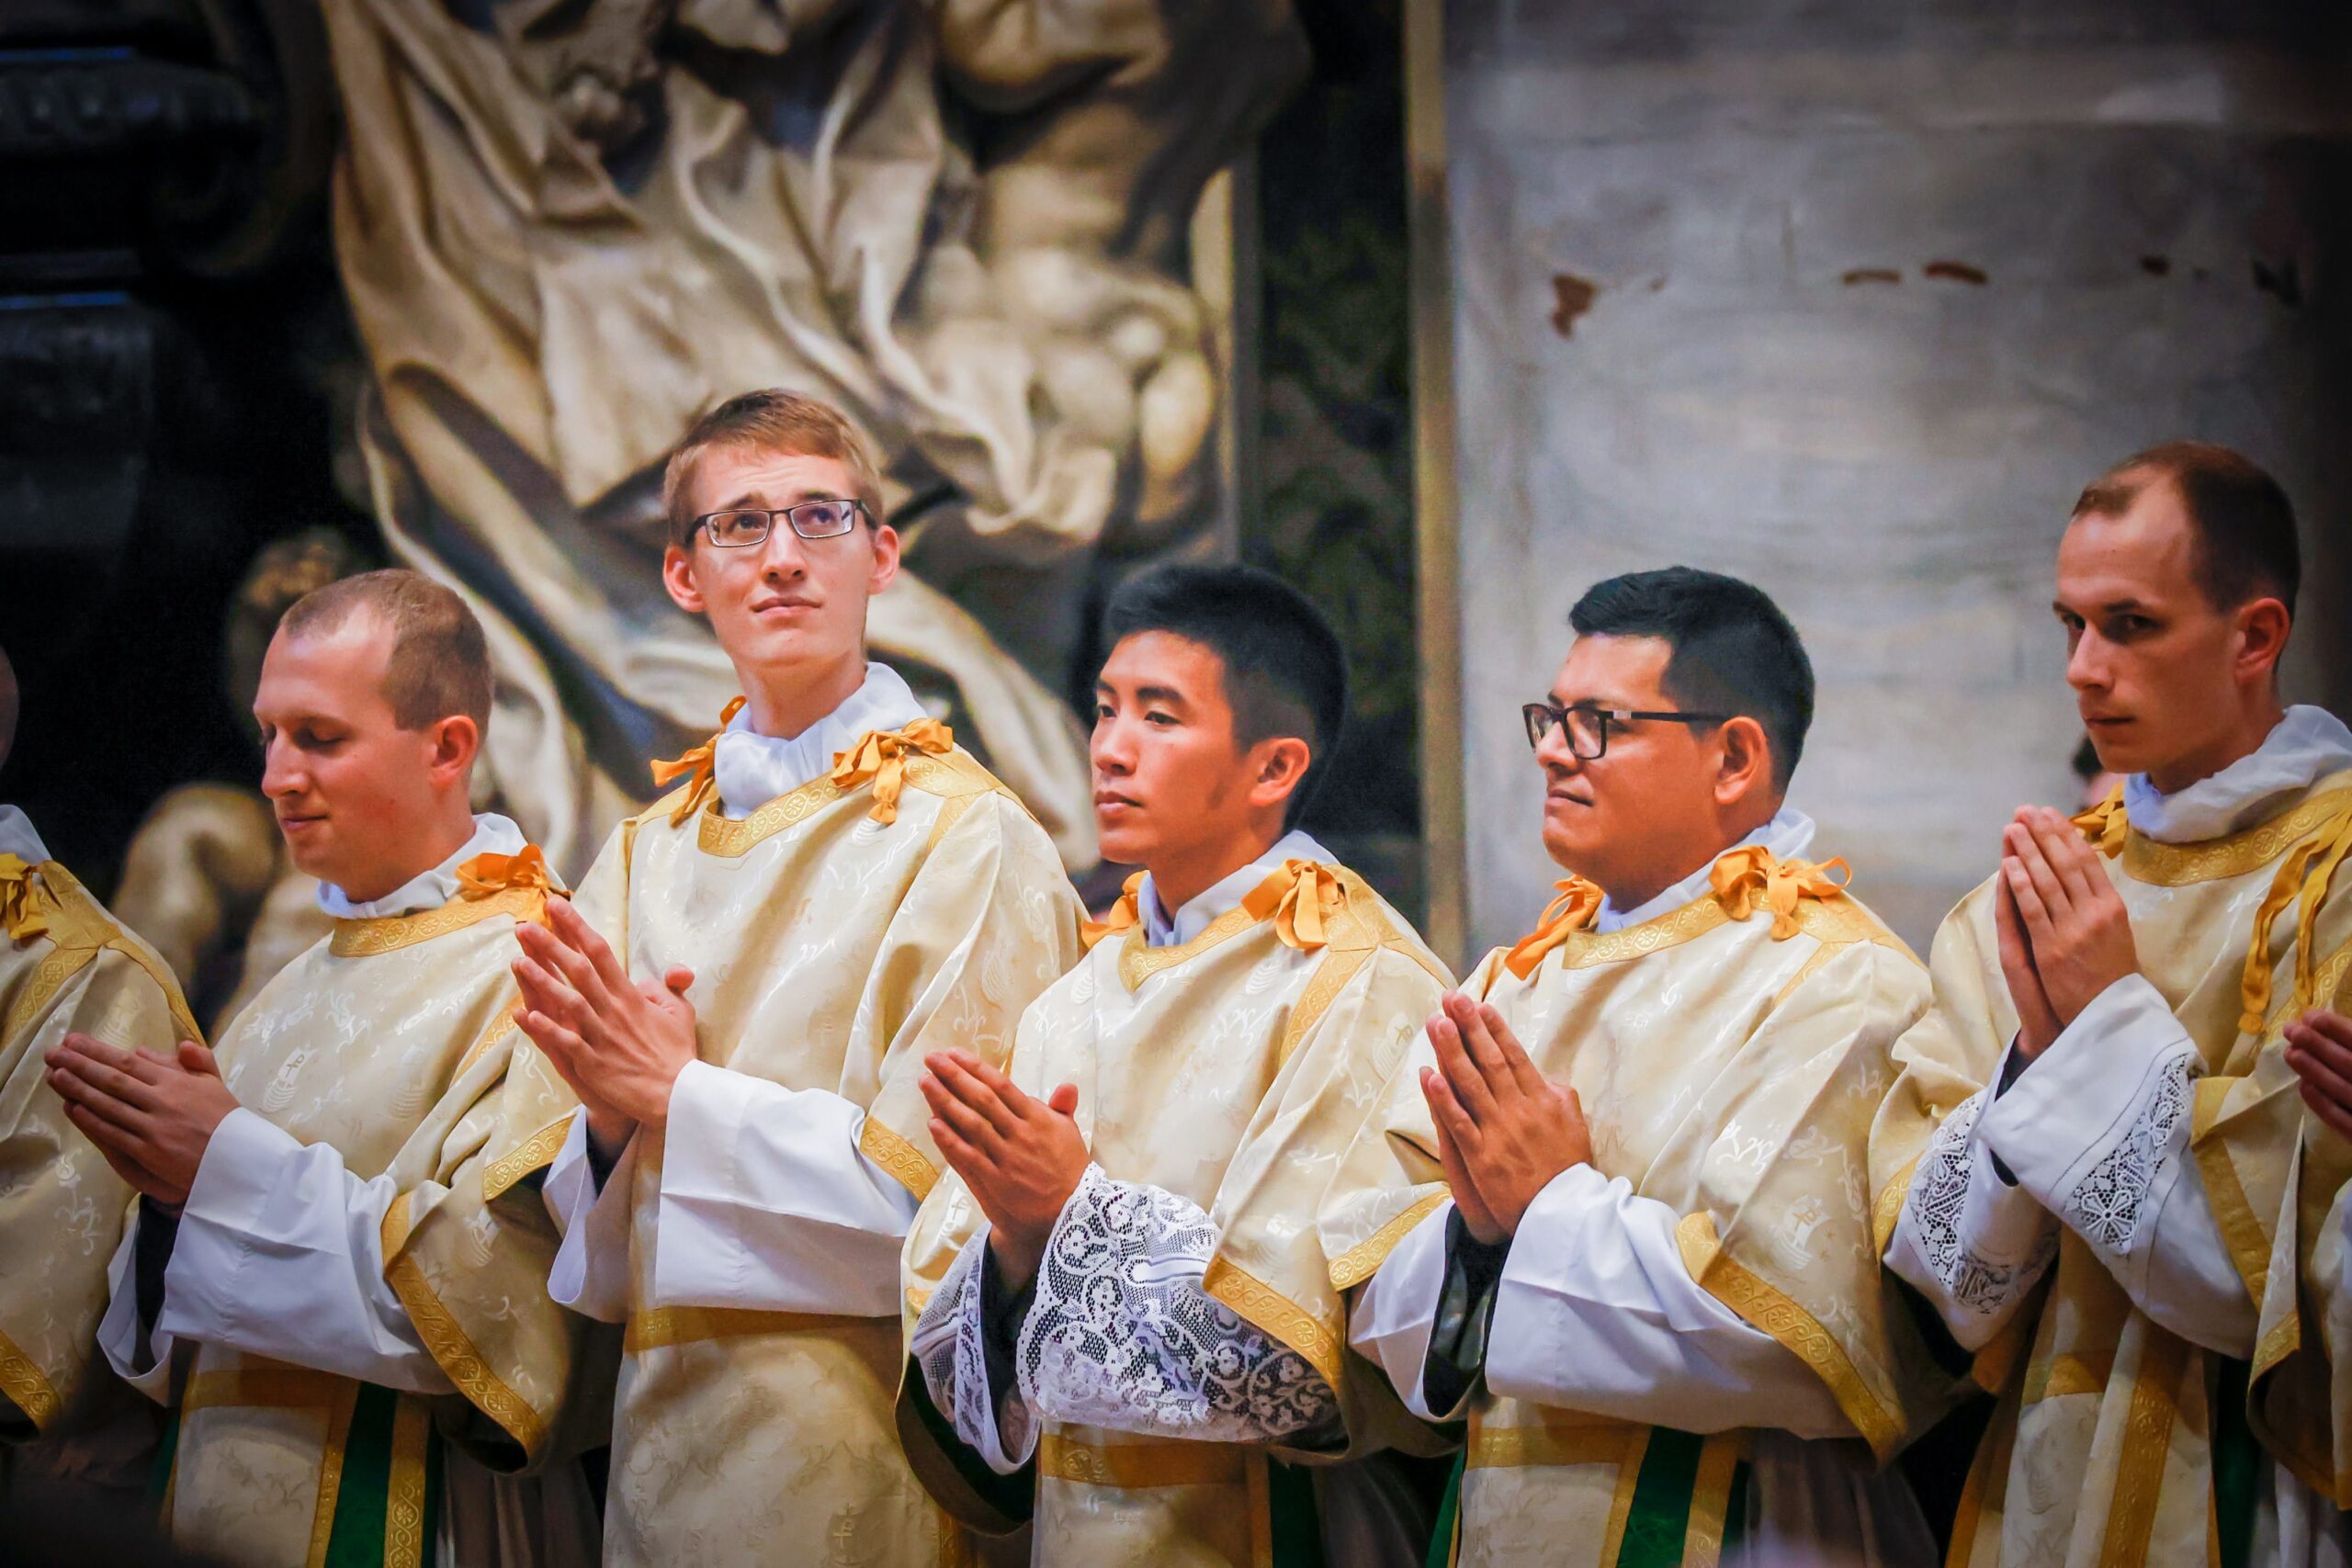 Deacon Zane Langenbrunner, second from left, at his Sept. 29, 2022 ordination as a transitional deacon in St. Peter's Basilica. Deacon Langenbrunner, an Indiana native, was selected to chant the Exsultet at the April 8, 2023, Easter Vigil with Pope Francis in St. Peter's Basilica. (OSV News photo/Jennifer Barton, Today's Catholic)